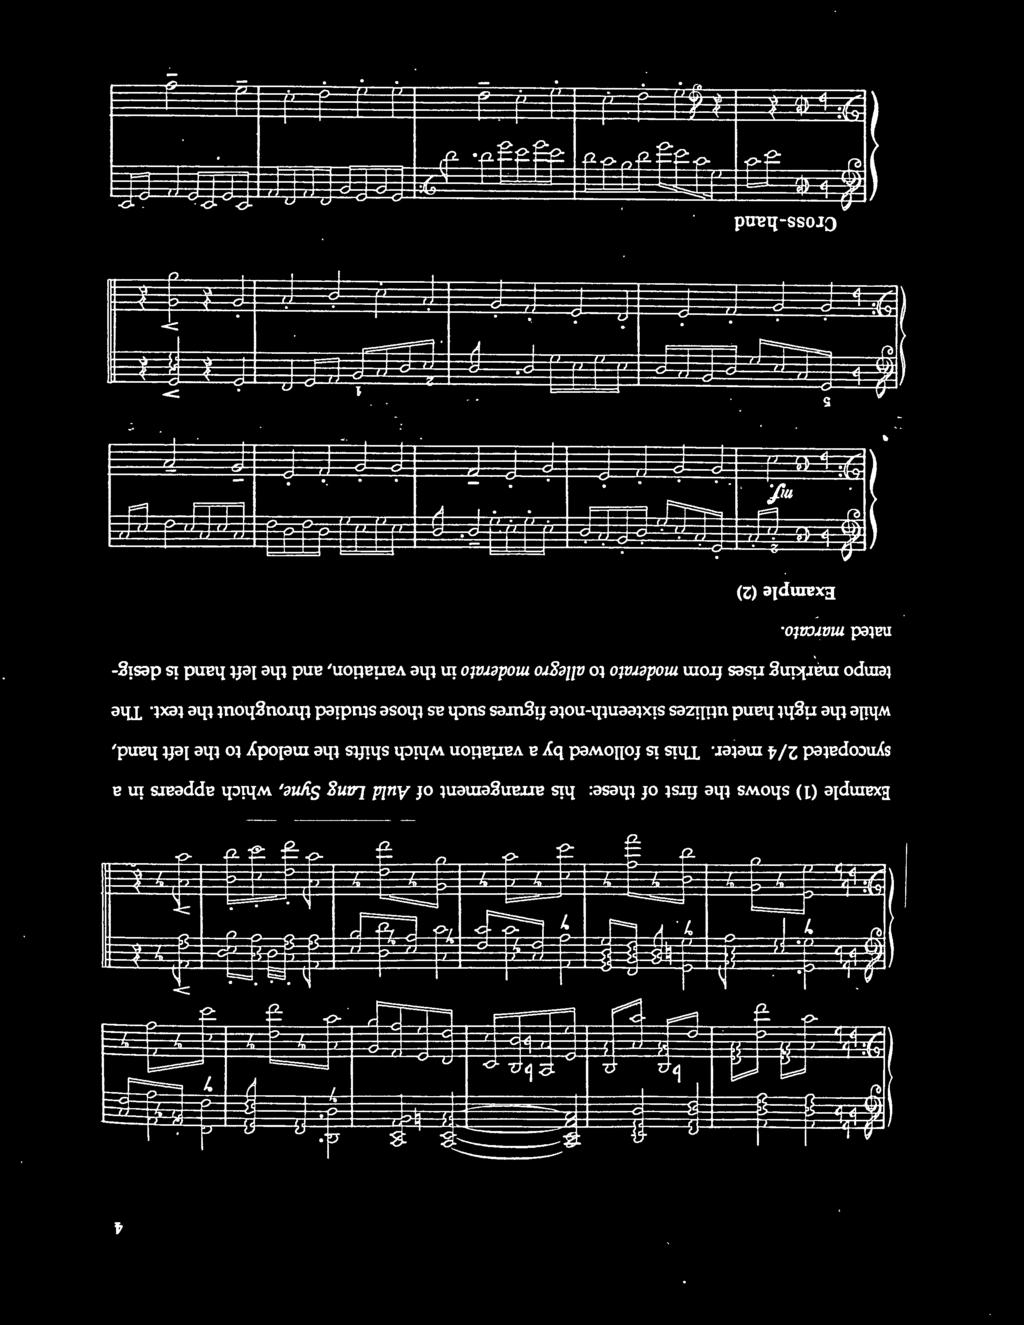 throughout the text The tempo rl<ing rises from moderato to allegro moderato in the